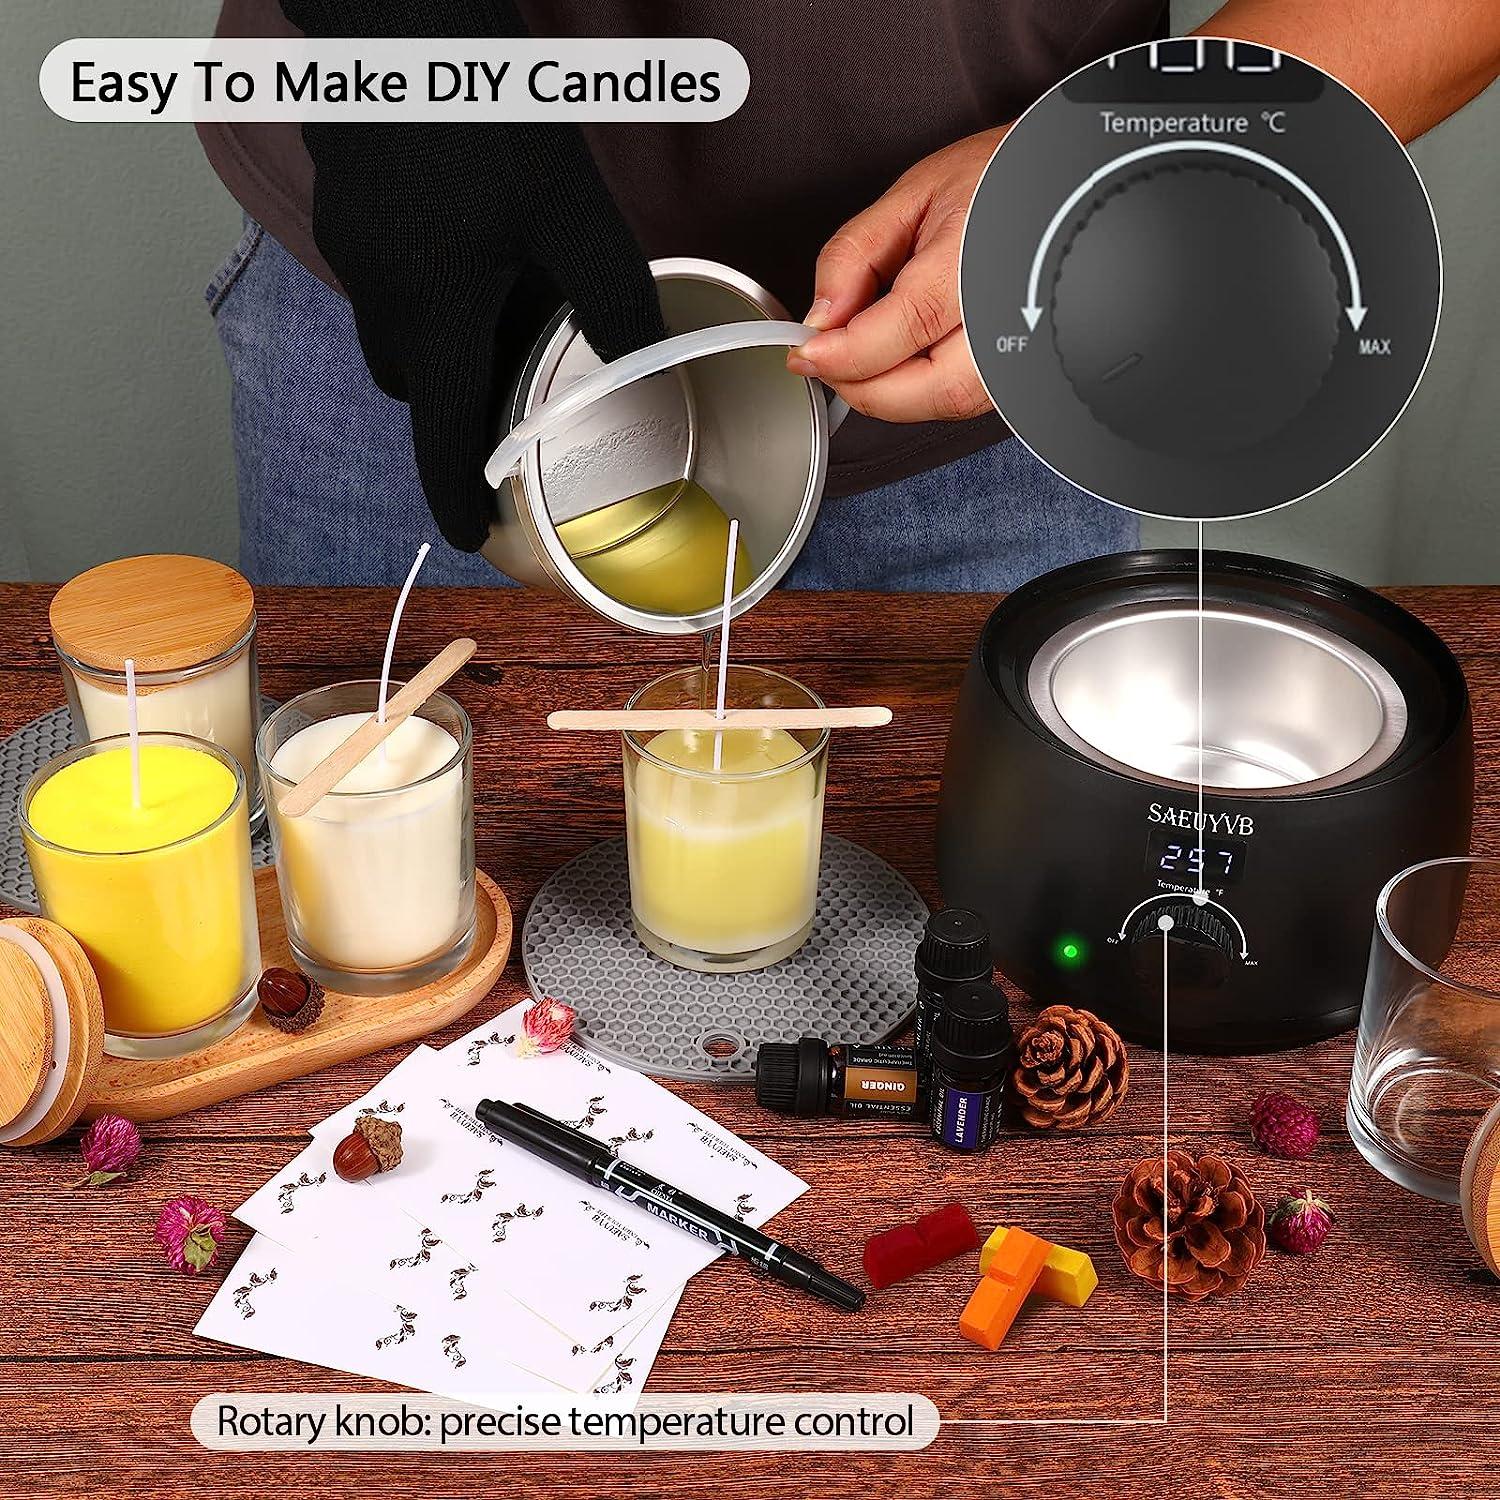 Electric Wax Melter Candle Making Supplies DIY Candles Making Kit